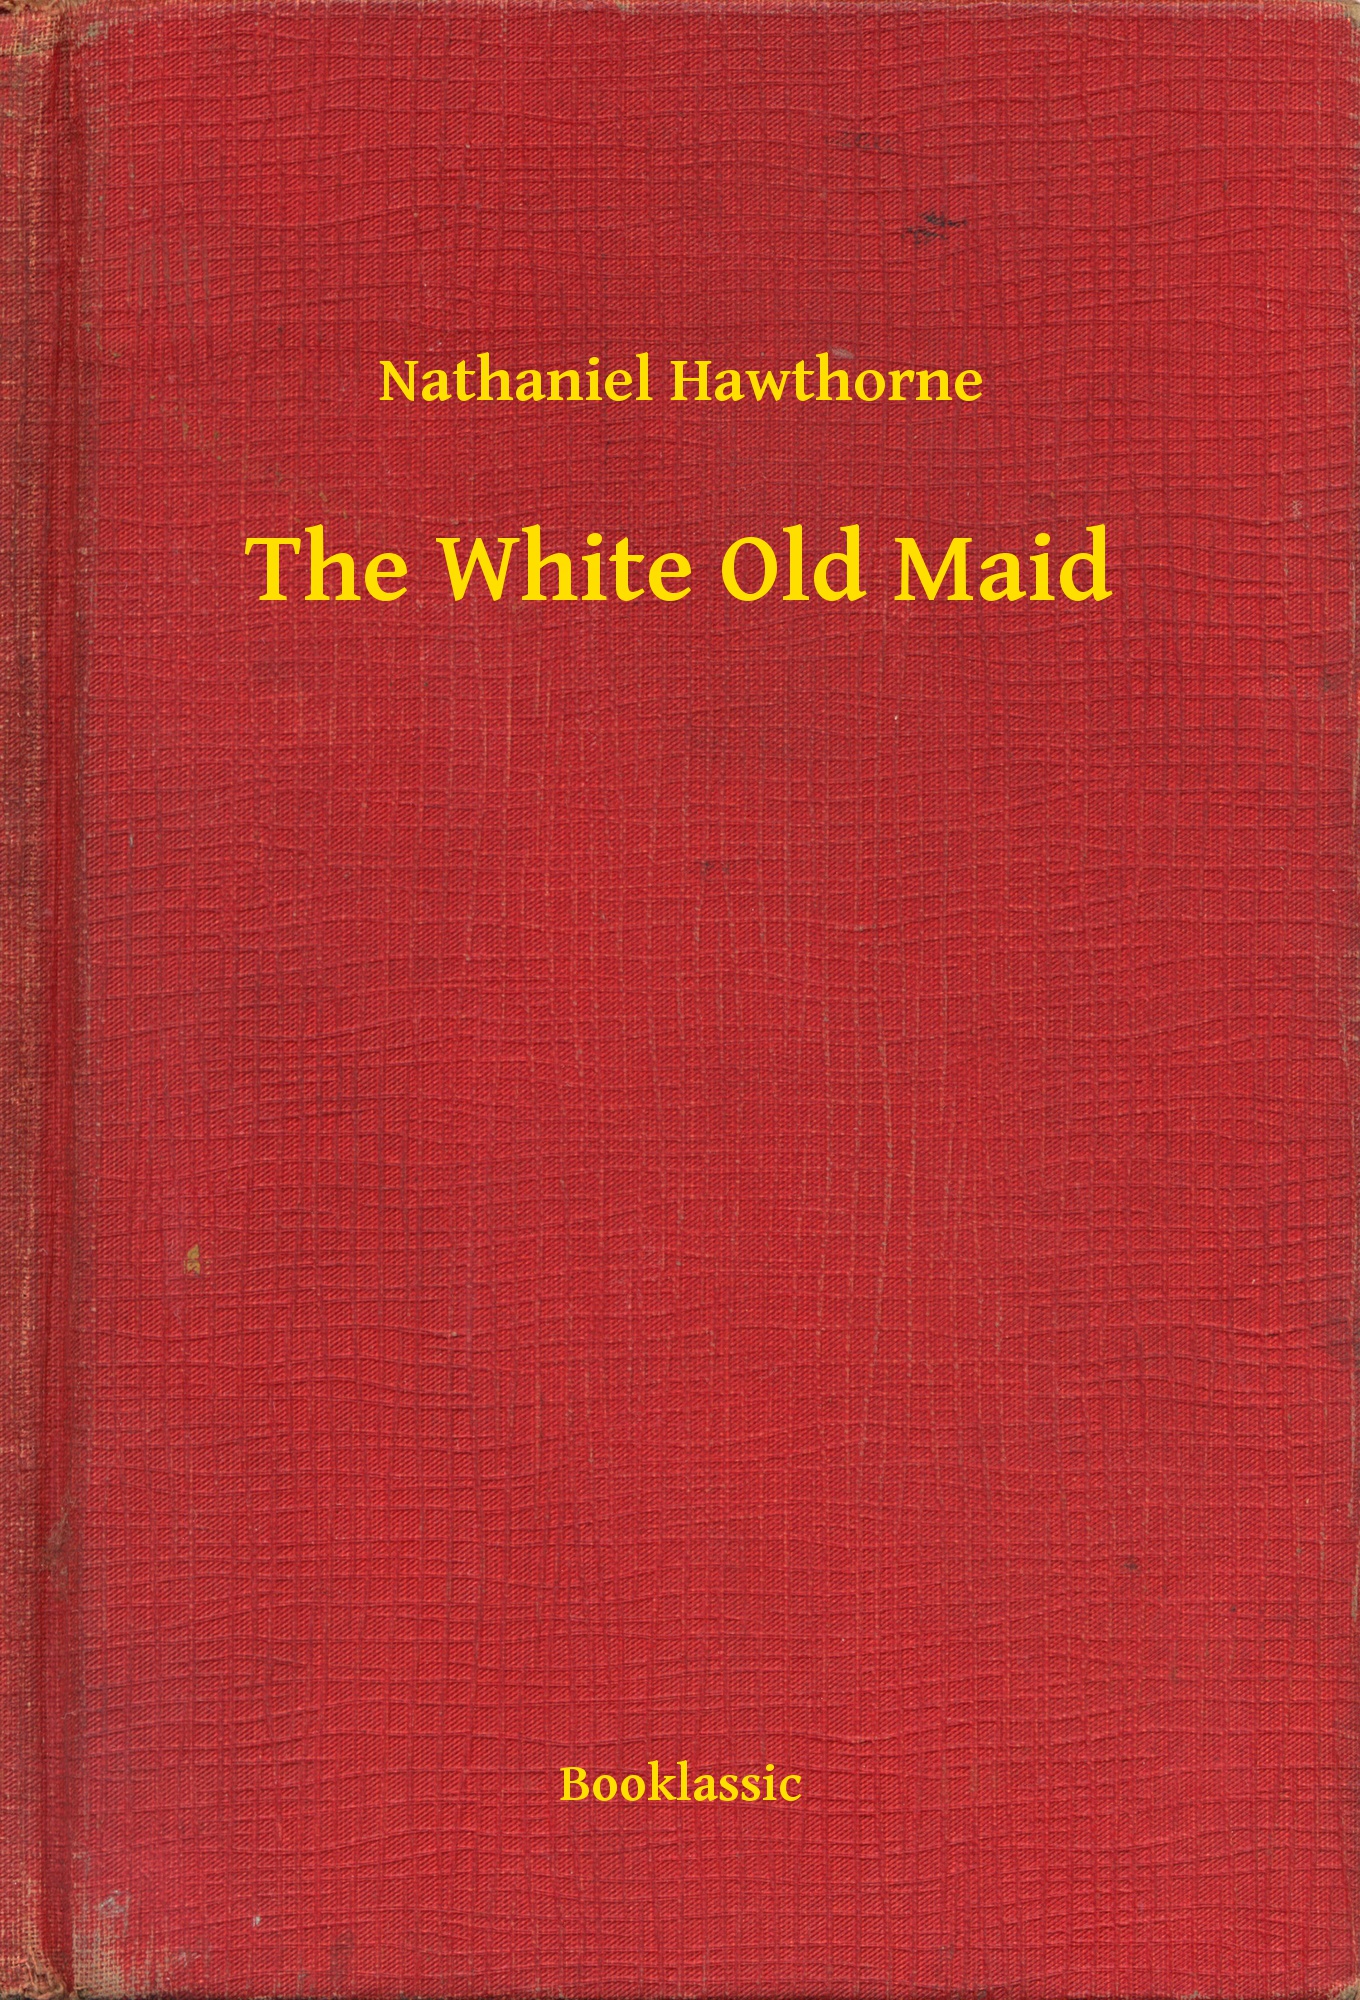 The White Old Maid